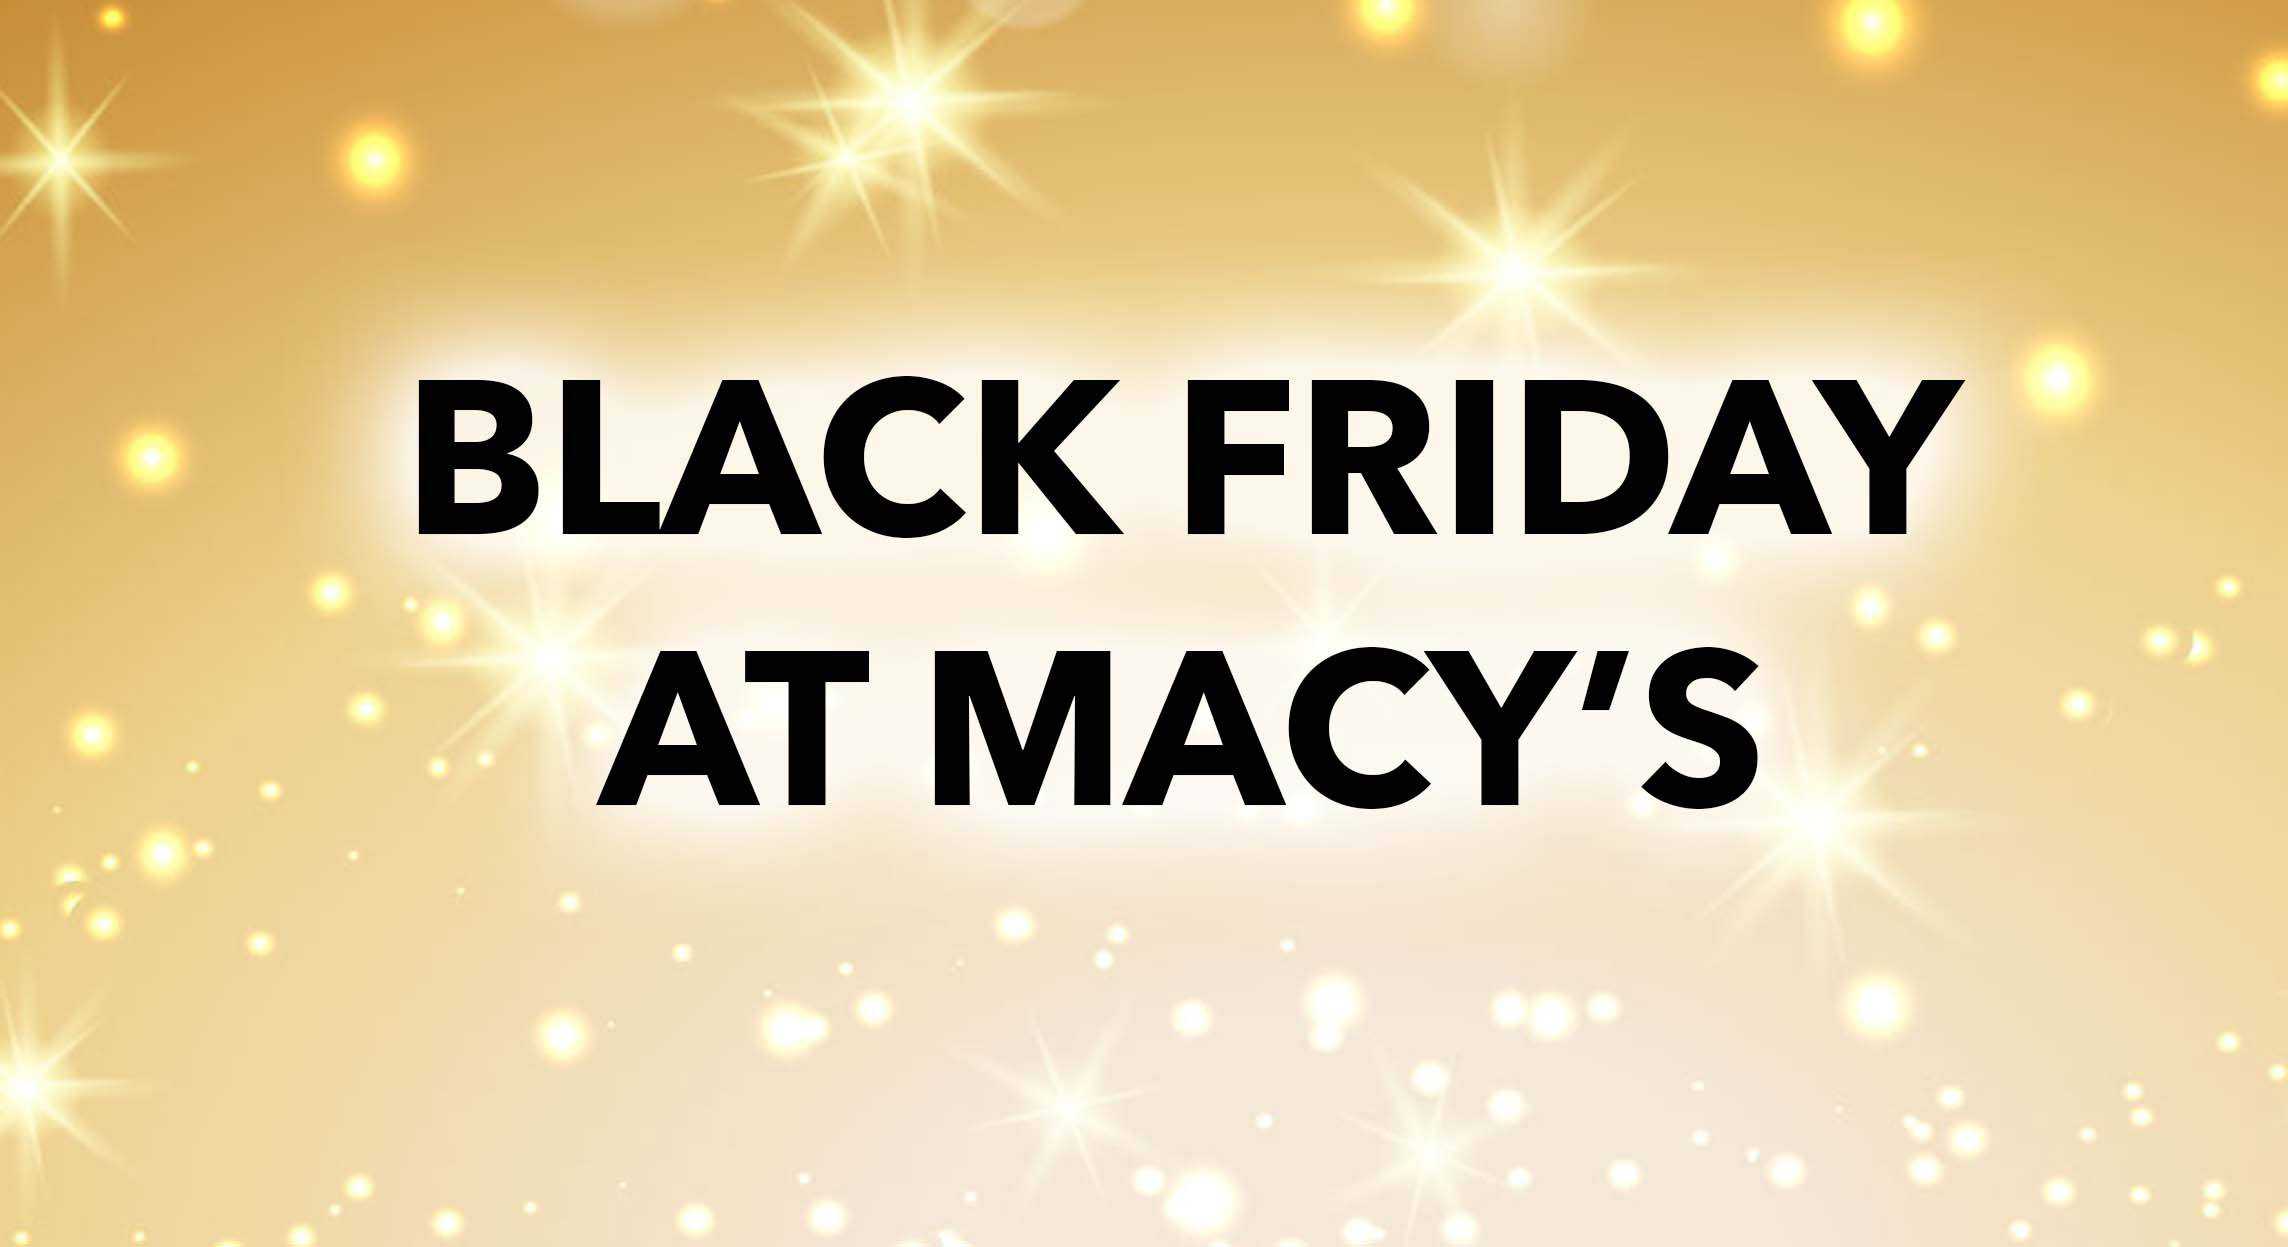 Black Friday Deals at Macys for Makeup & Beauty Lovers